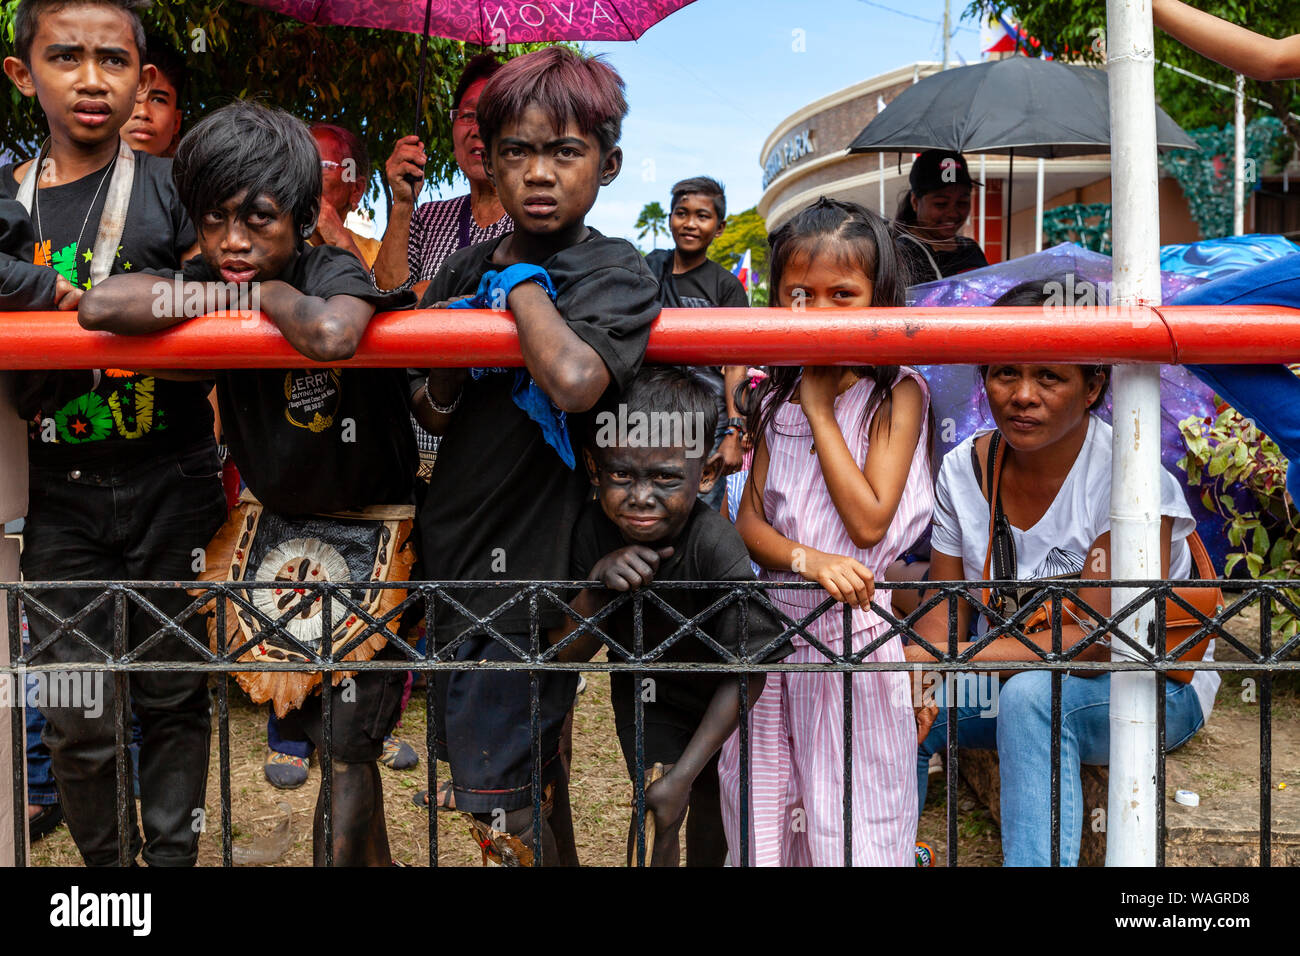 Filipinos Watch A Passing Procession During The Ati-Atihan Festival, Kalibo, Panay Island, Aklan Province, The Philippines. Stock Photo